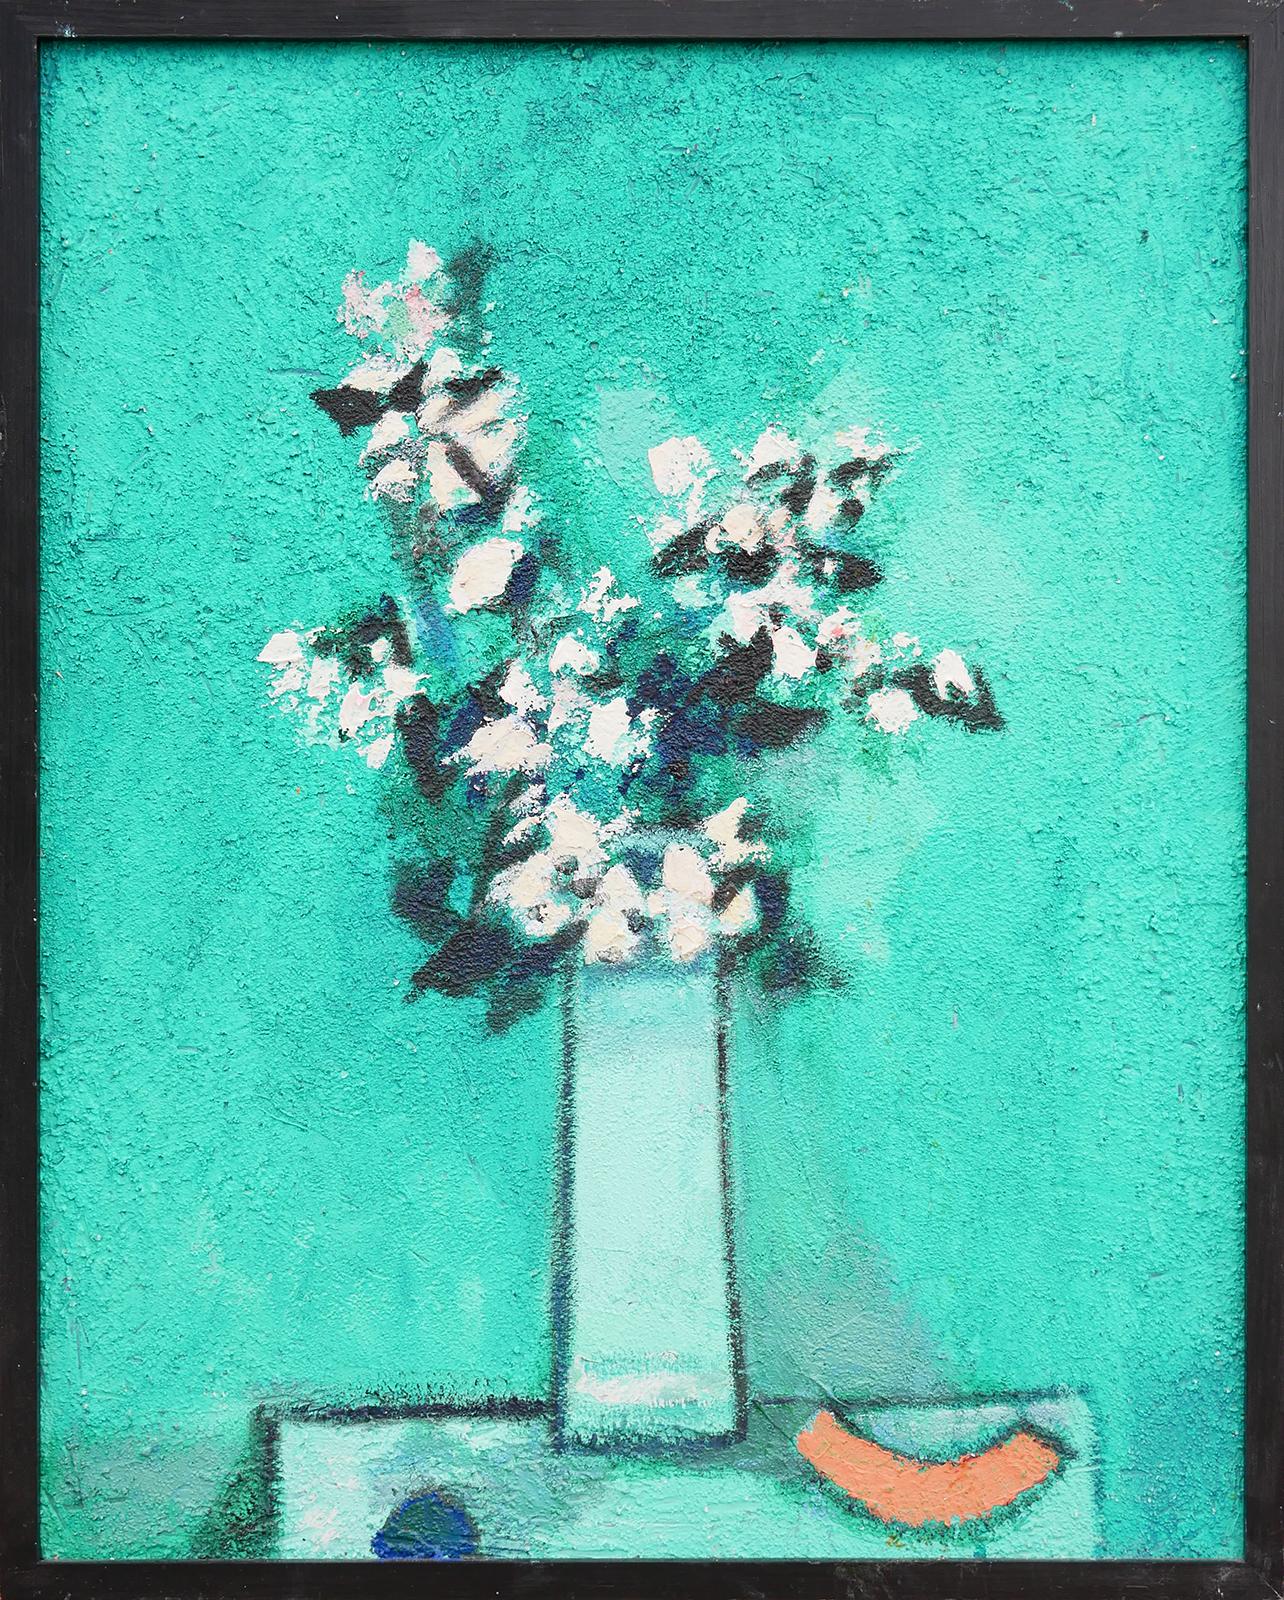 David Adickes Abstract Painting - "Flowers in Tall Vase with Melon" Turquoise Abstract Floral Still Life Painting